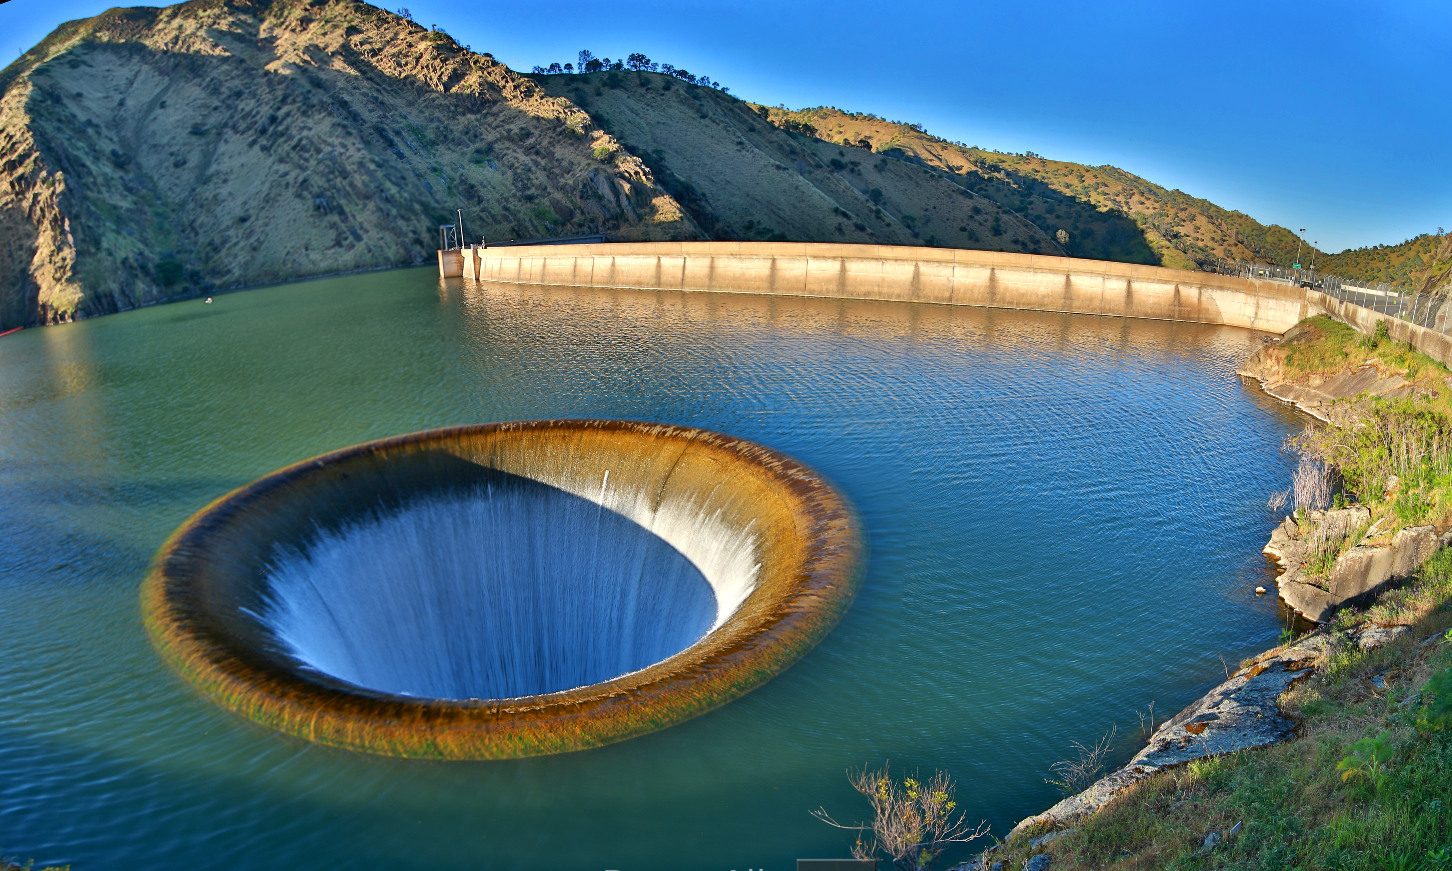 The spillway prevents overflow of water in the lake. 